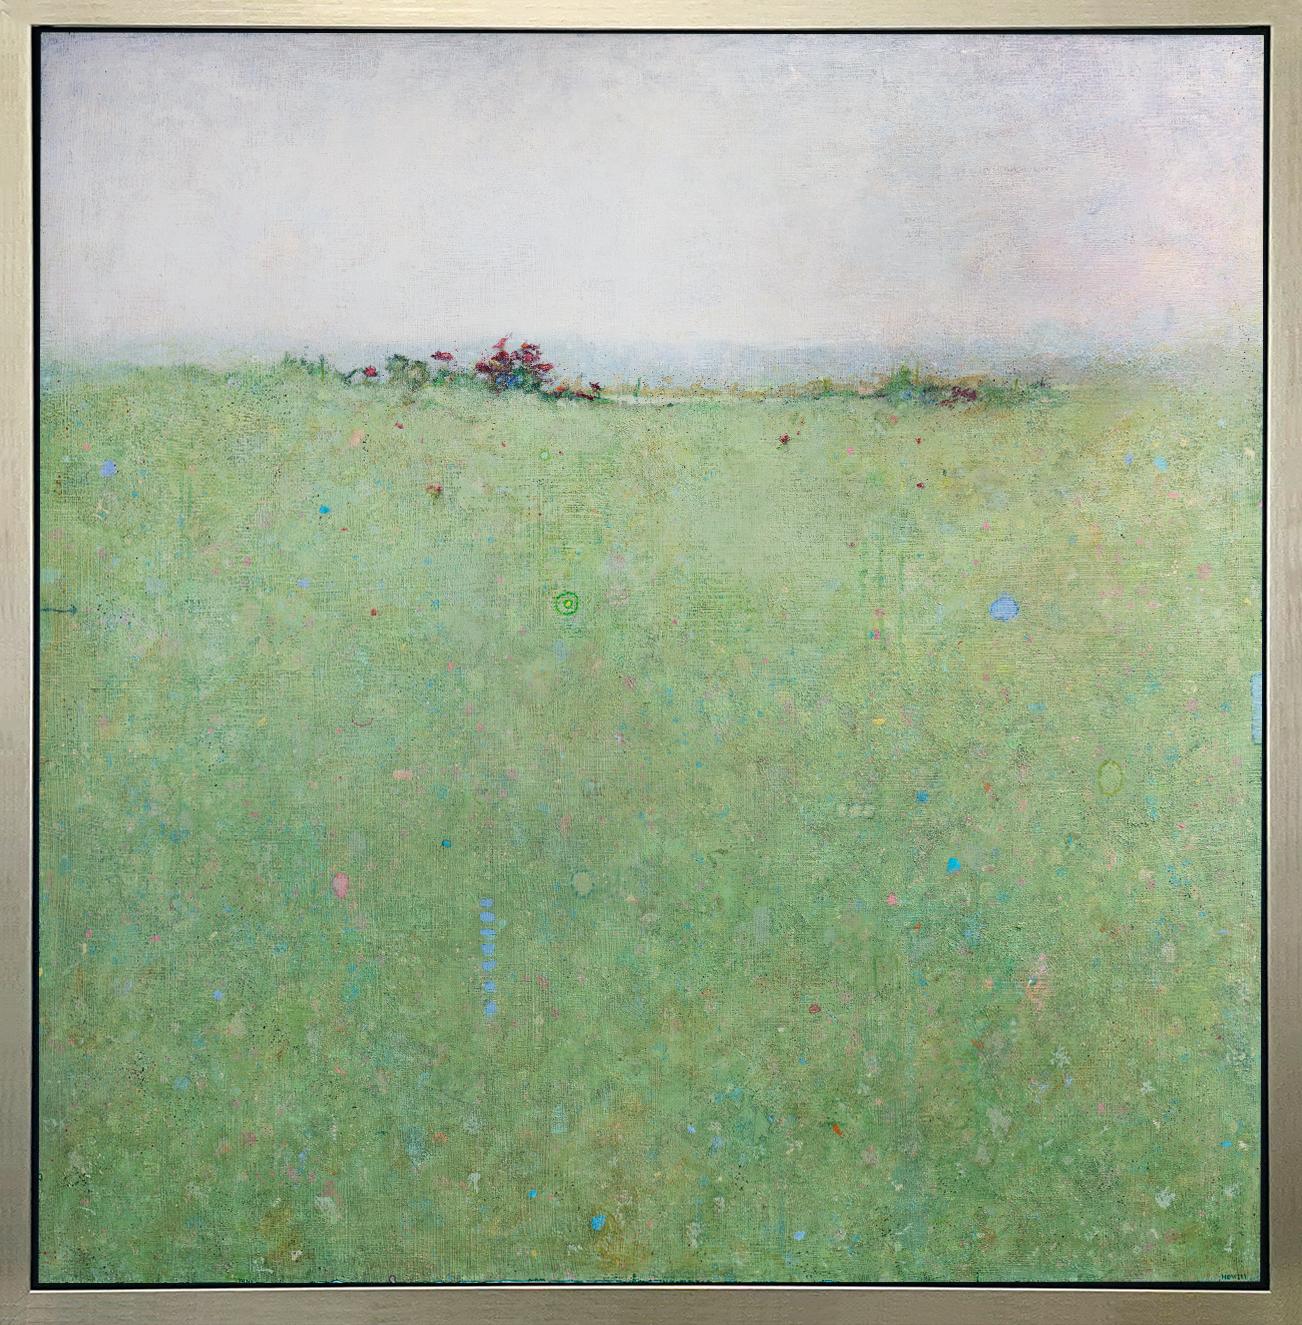 Elwood Howell Abstract Print - "Haze, " Limited Edition Giclee Print, 53" x 53"